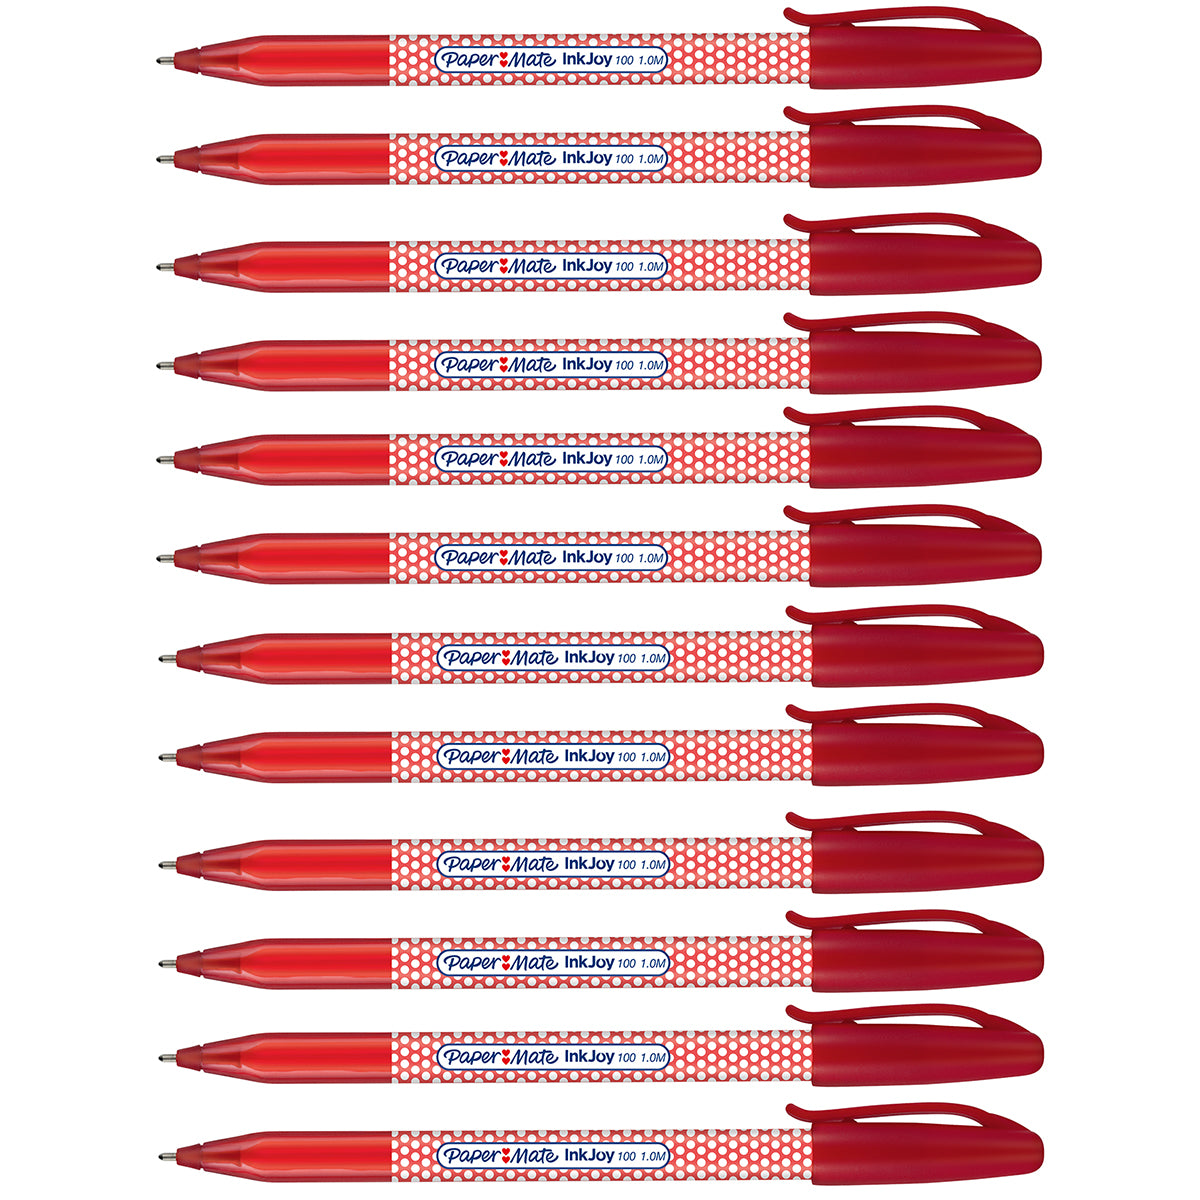 Paper Mate Inkjoy 100 ST Red Ink Ballpoint Pens, Dotted Design  Capped, Pack of 12  Paper Mate Ballpoint Pen